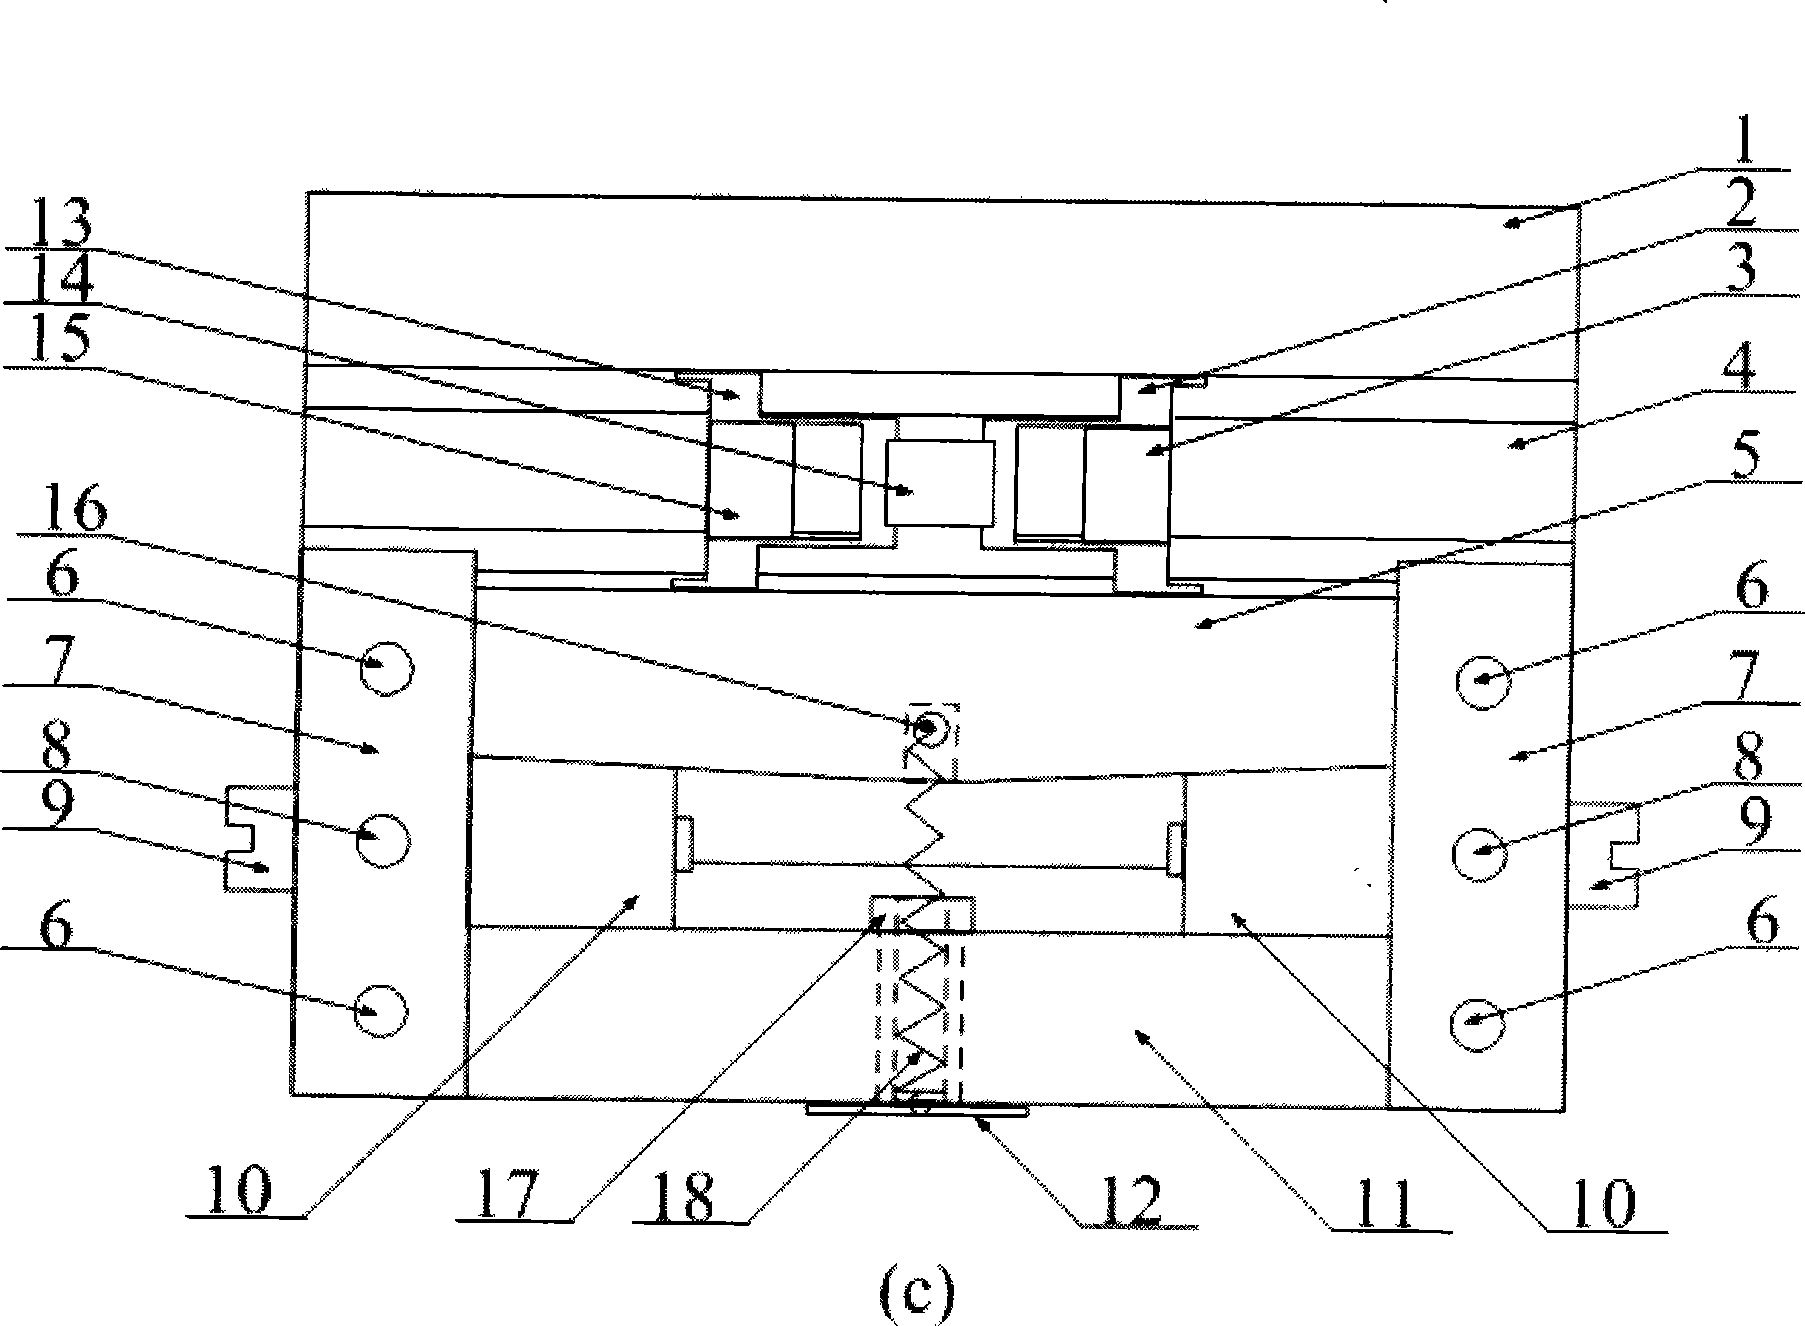 Piezoelectricity actuator with large displacement and large impulse force